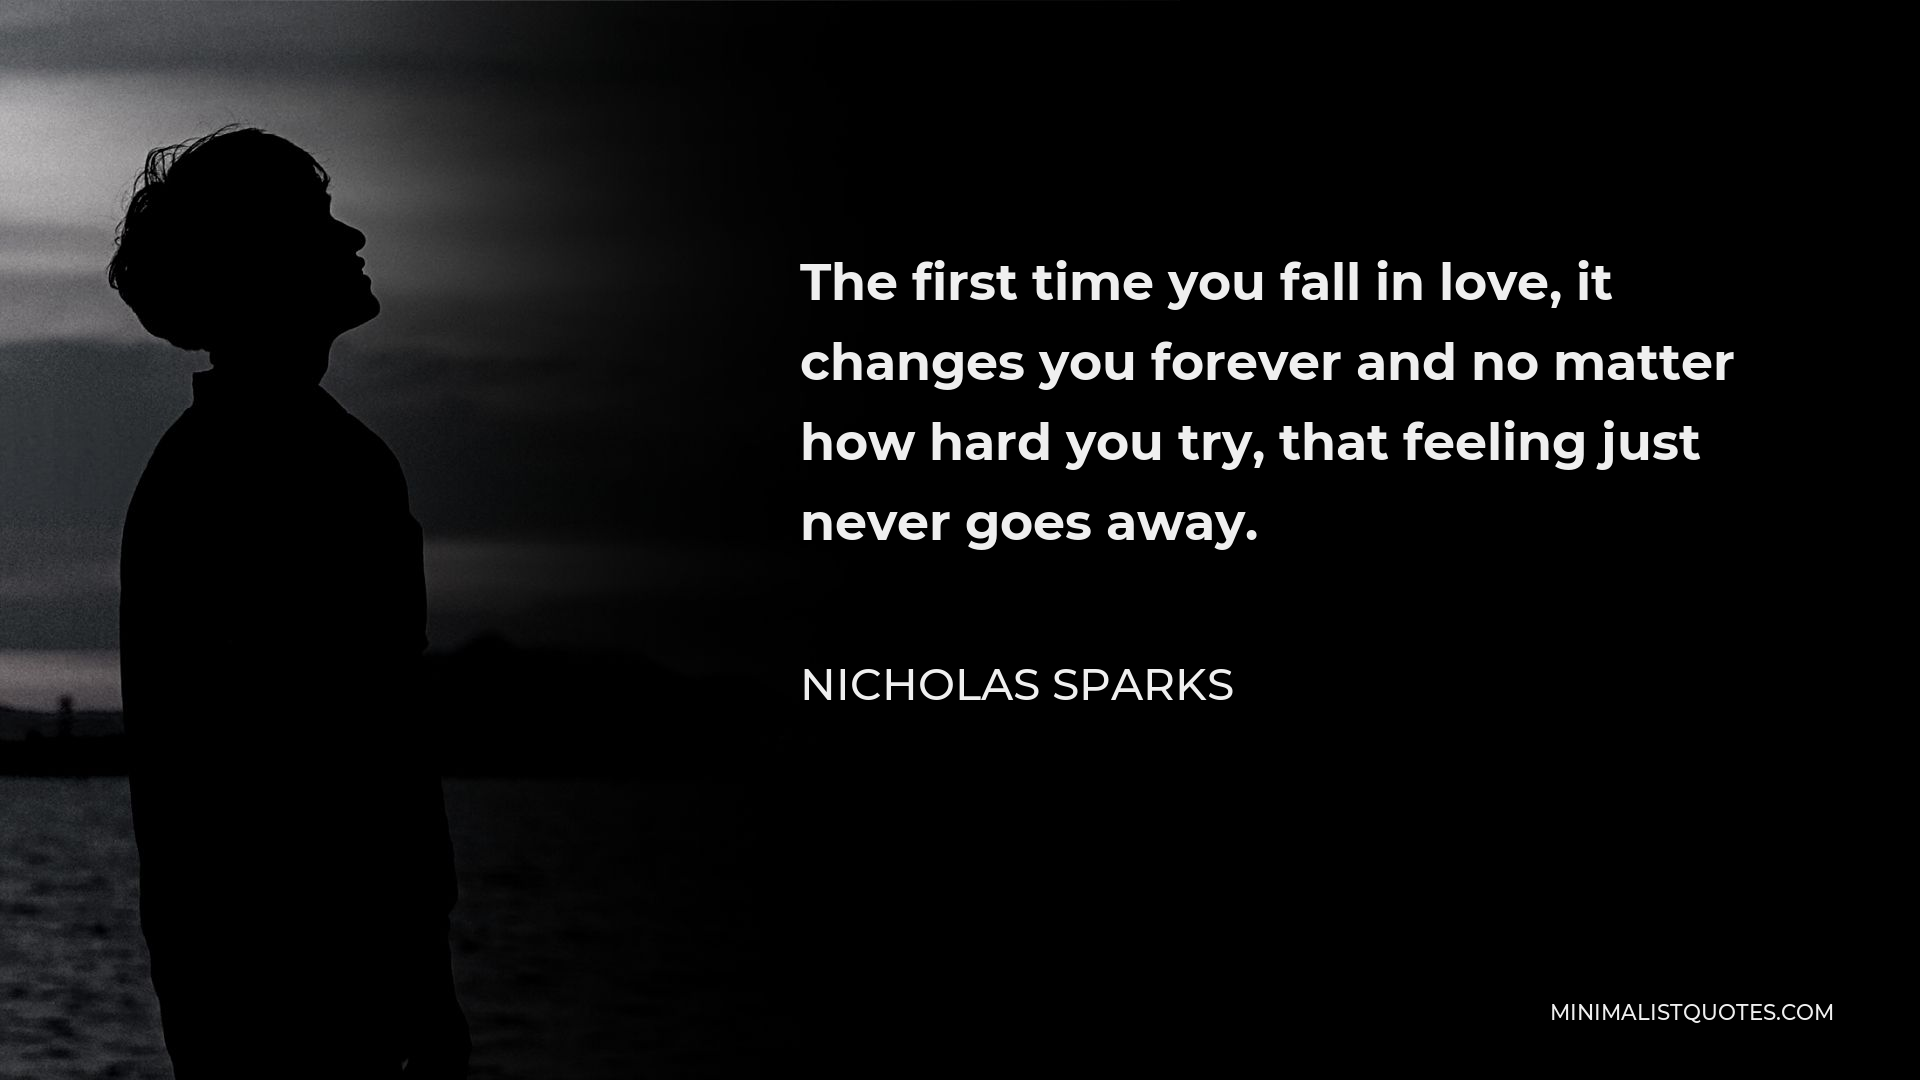 Nicholas Sparks Quote - The first time you fall in love, it changes you forever and no matter how hard you try, that feeling just never goes away.